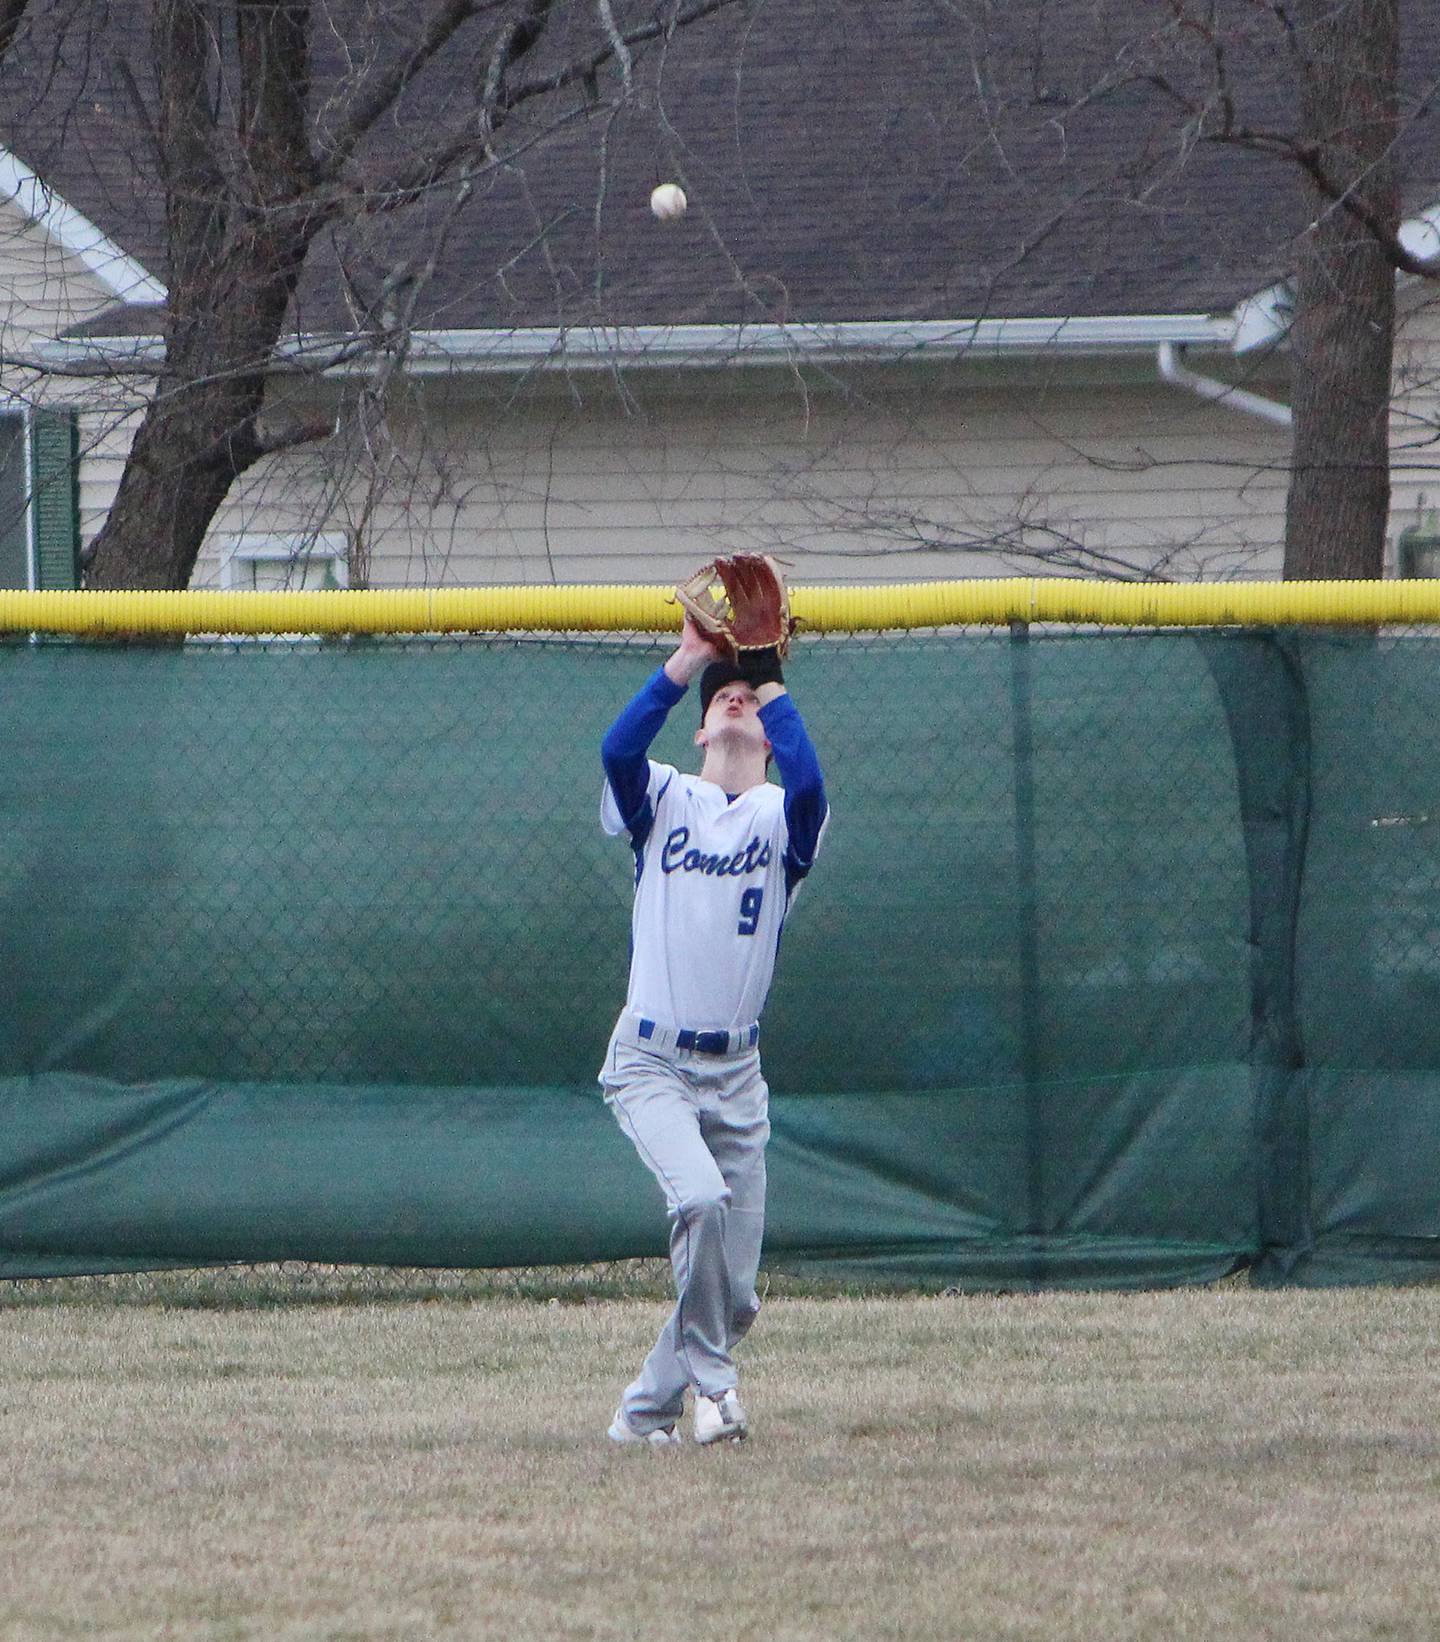 Newman's Joe Oswalt catches a fly ball in left field against Kewanee on Thursday, March 30, 2023 during their Three Rivers East game in Sterling.